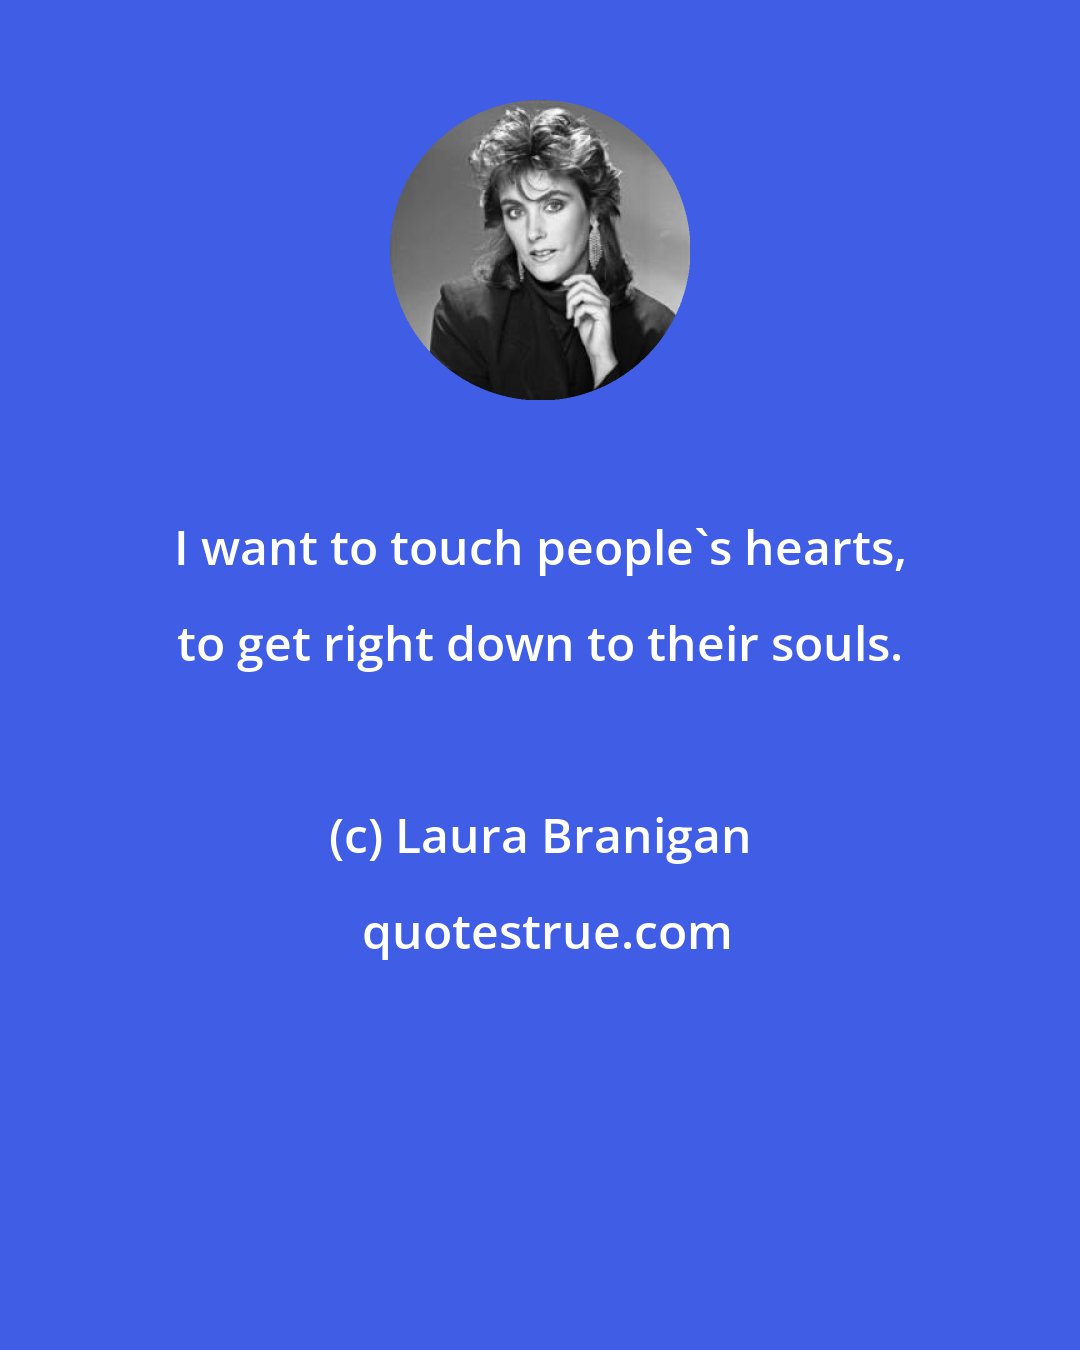 Laura Branigan: I want to touch people's hearts, to get right down to their souls.